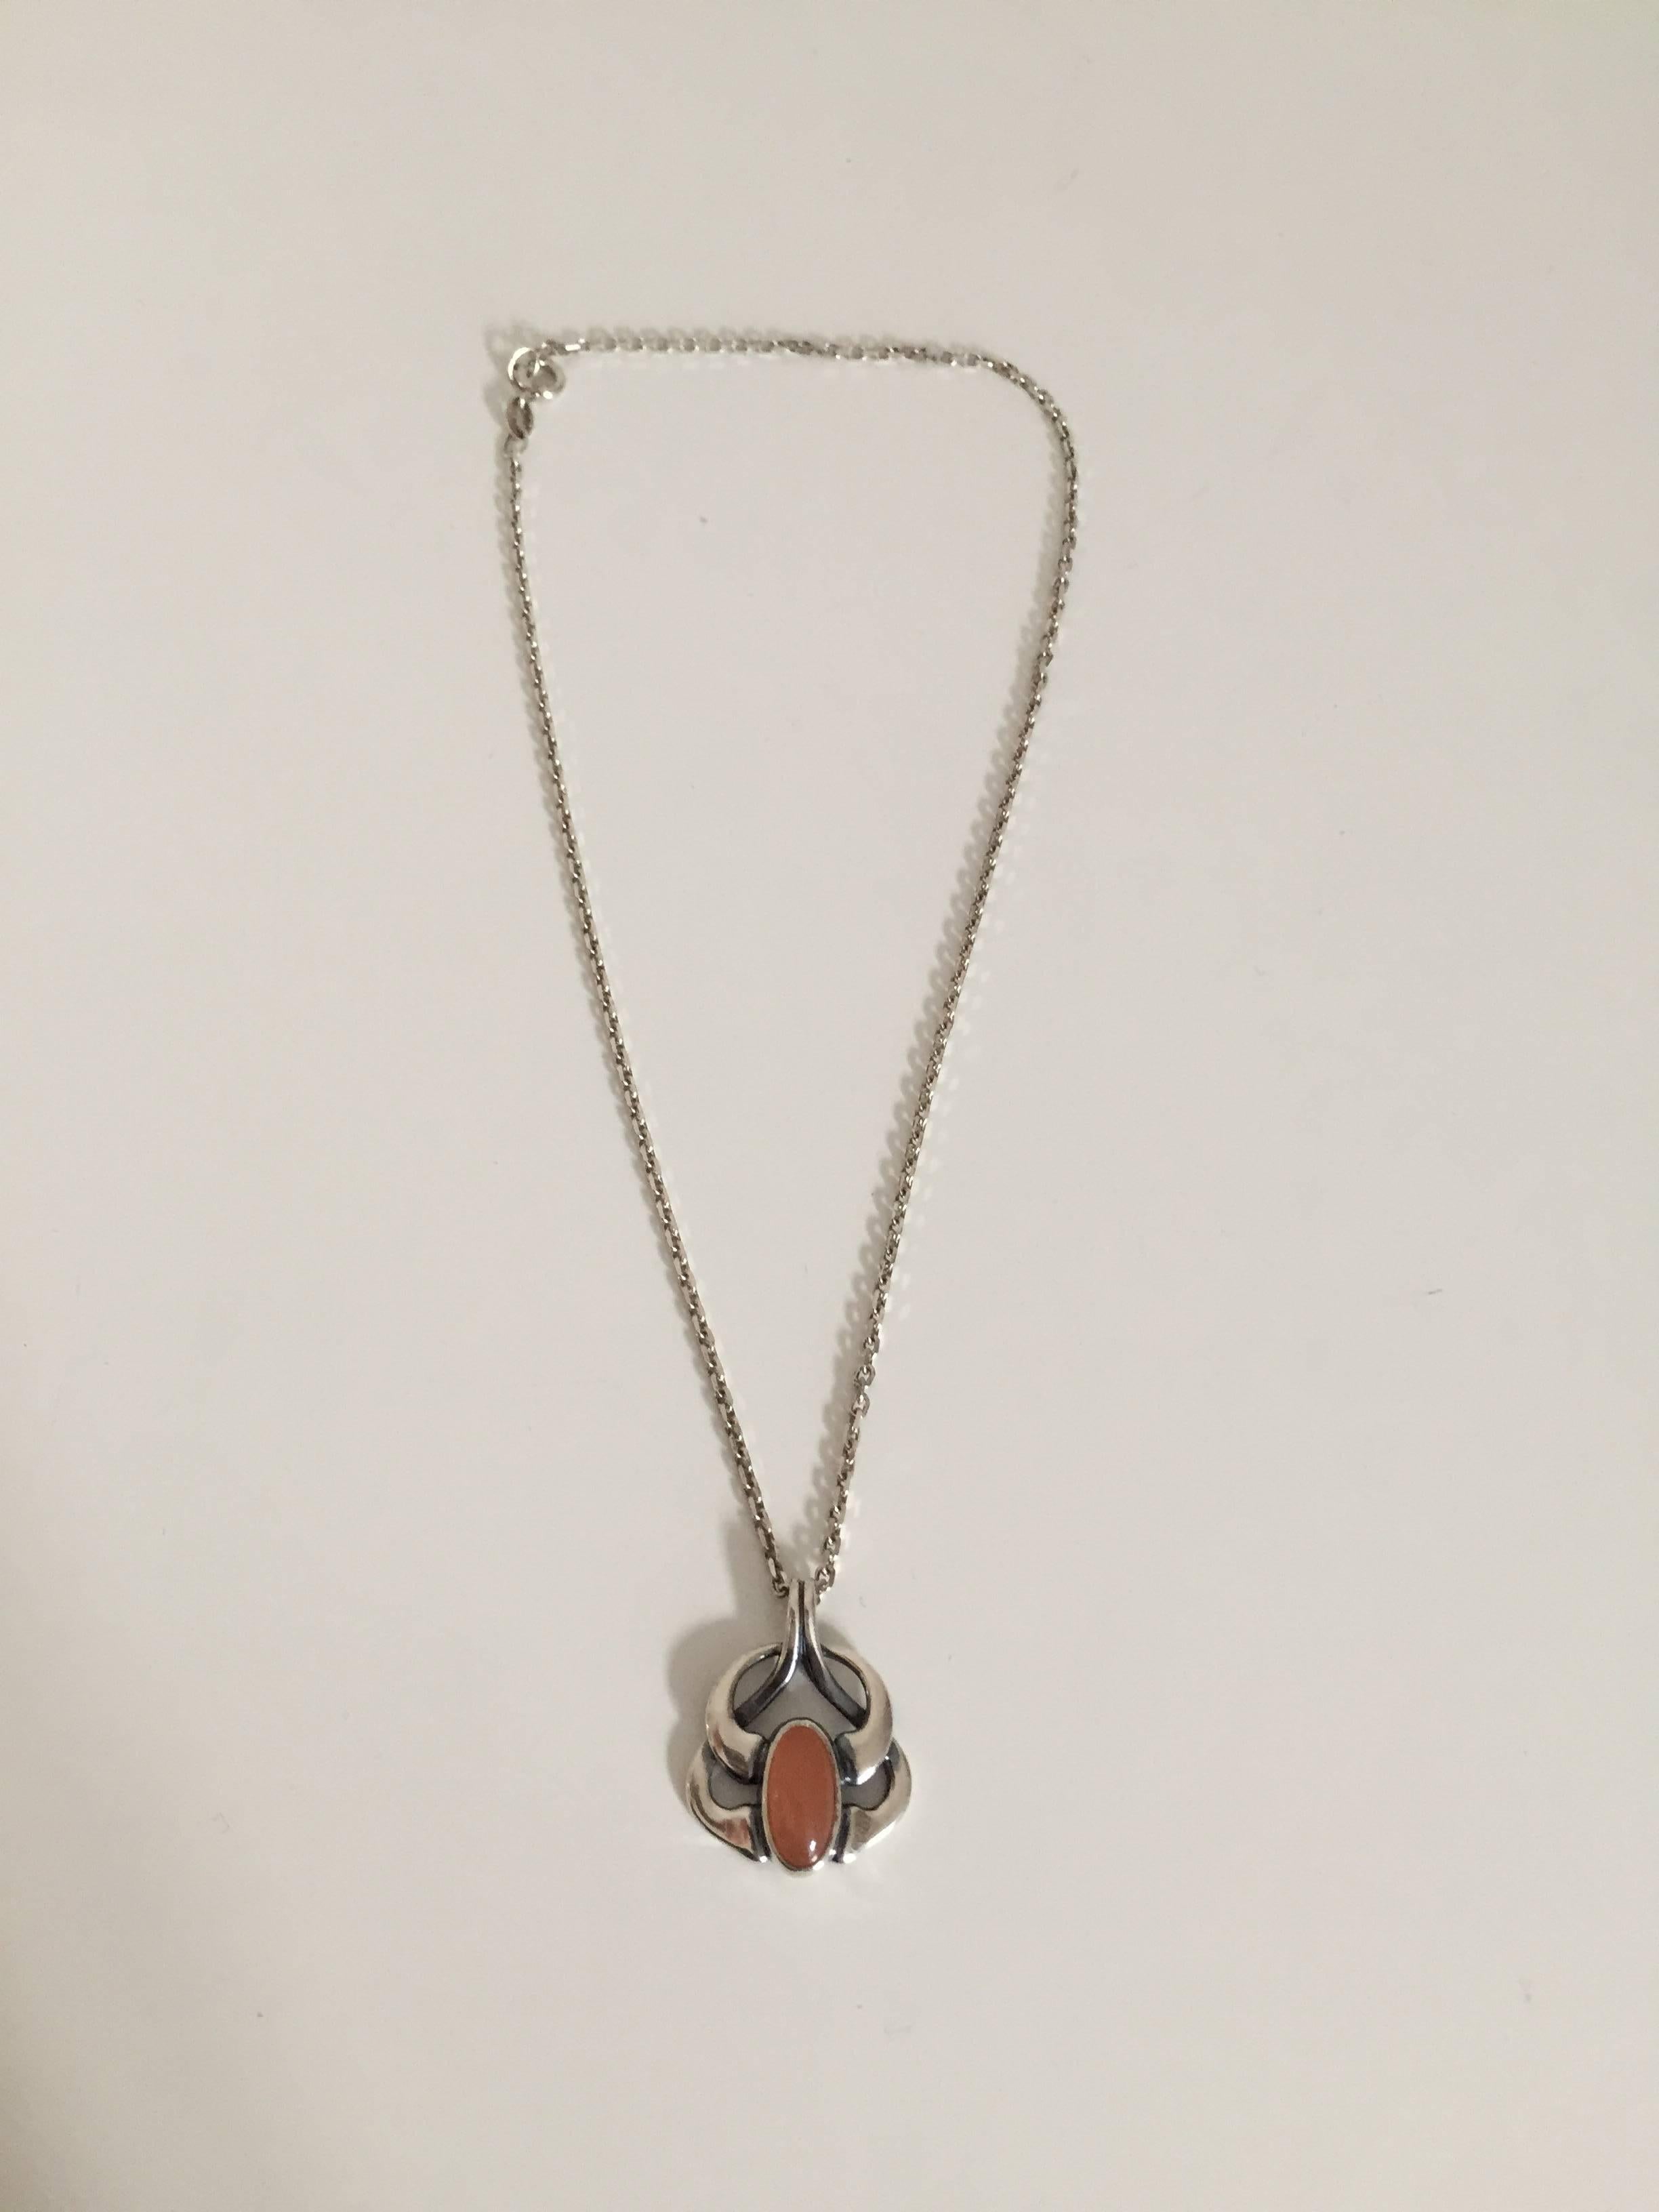 Georg Jensen 2006 sterling silver annual pendant necklace. 

Chain measures 38 cm (14 61/64